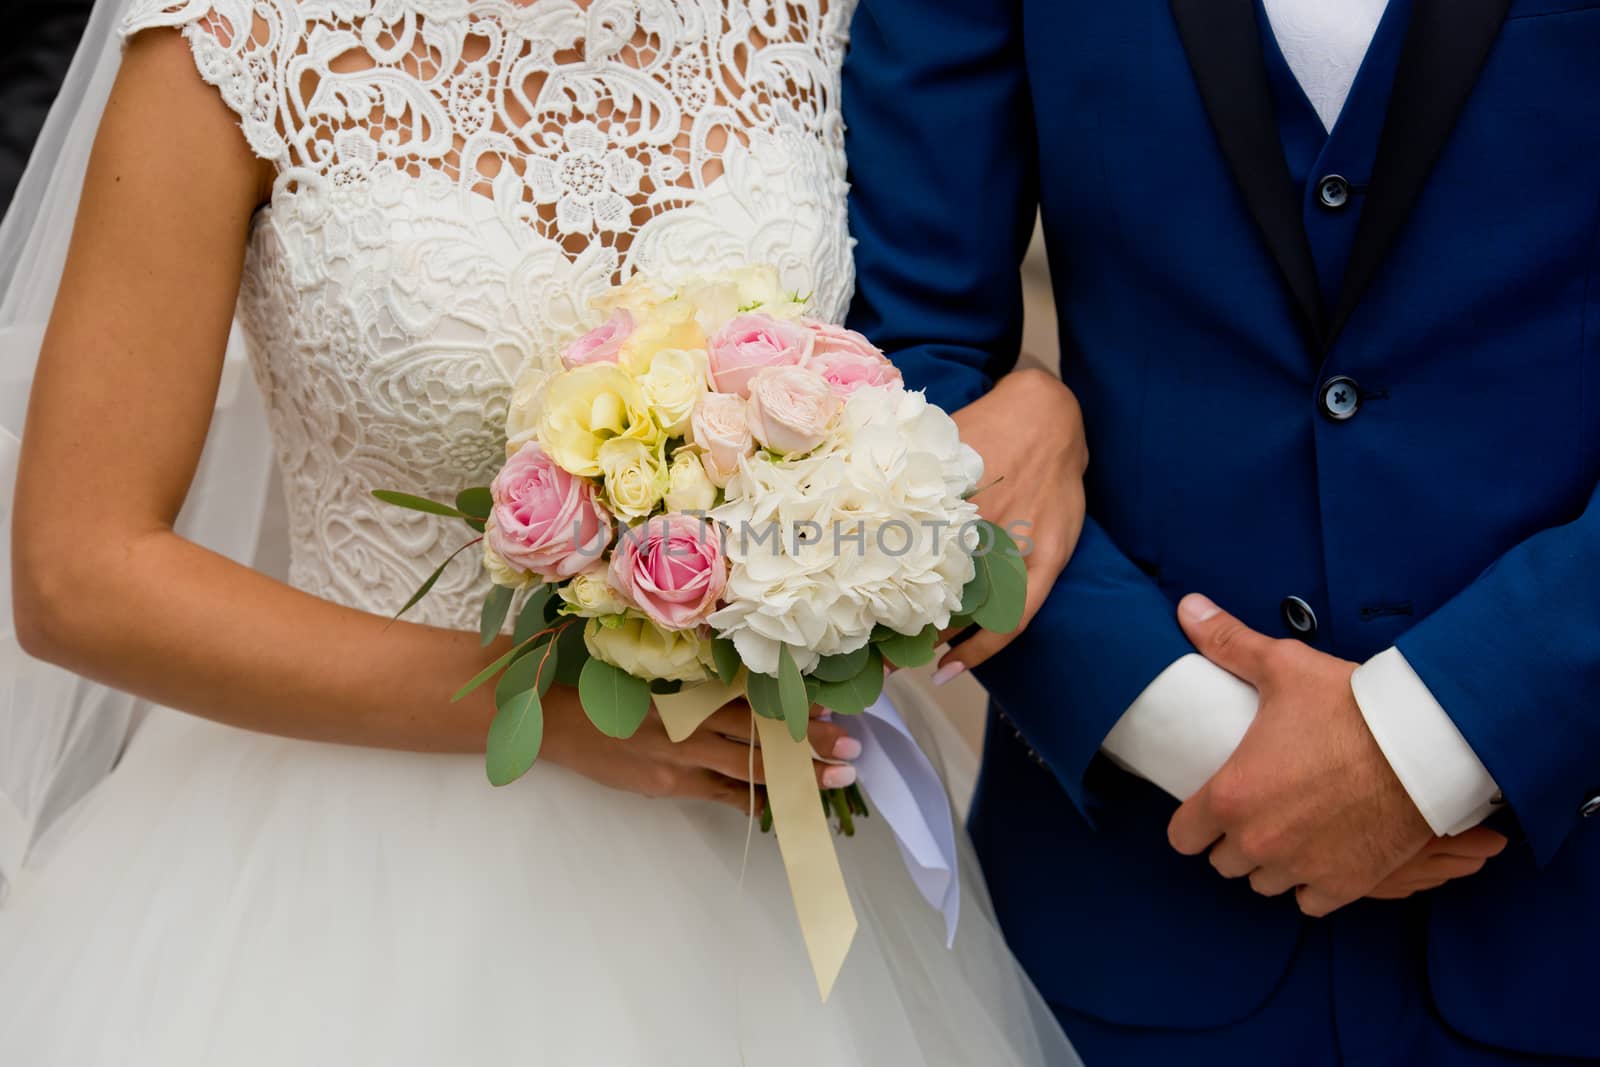 The bride and groom stand with their hands together. The bride's bouquet.